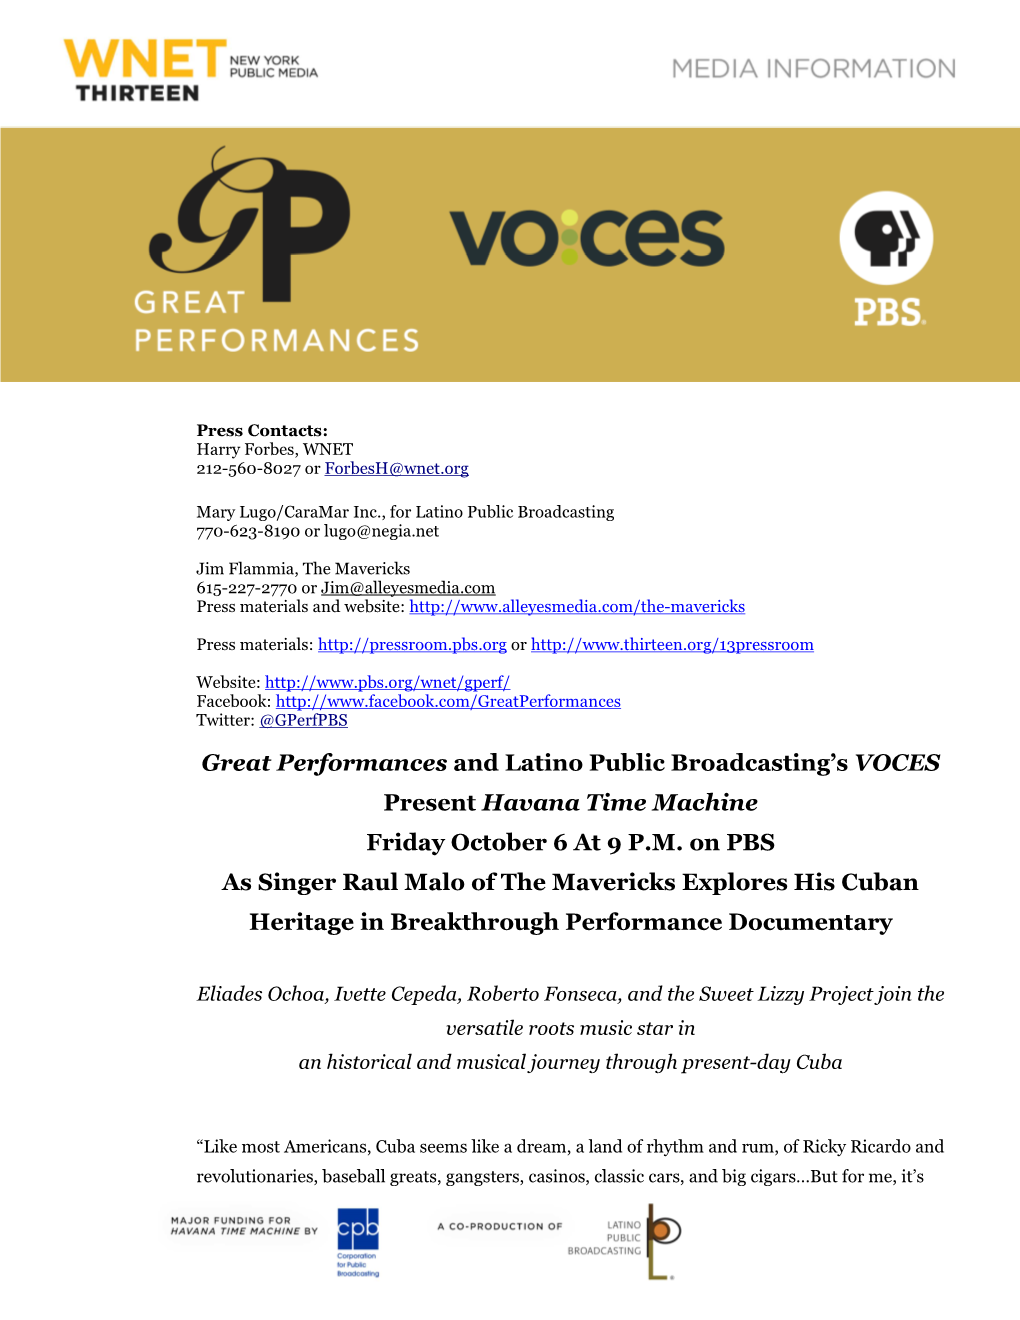 Great Performances and Latino Public Broadcasting's VOCES Present